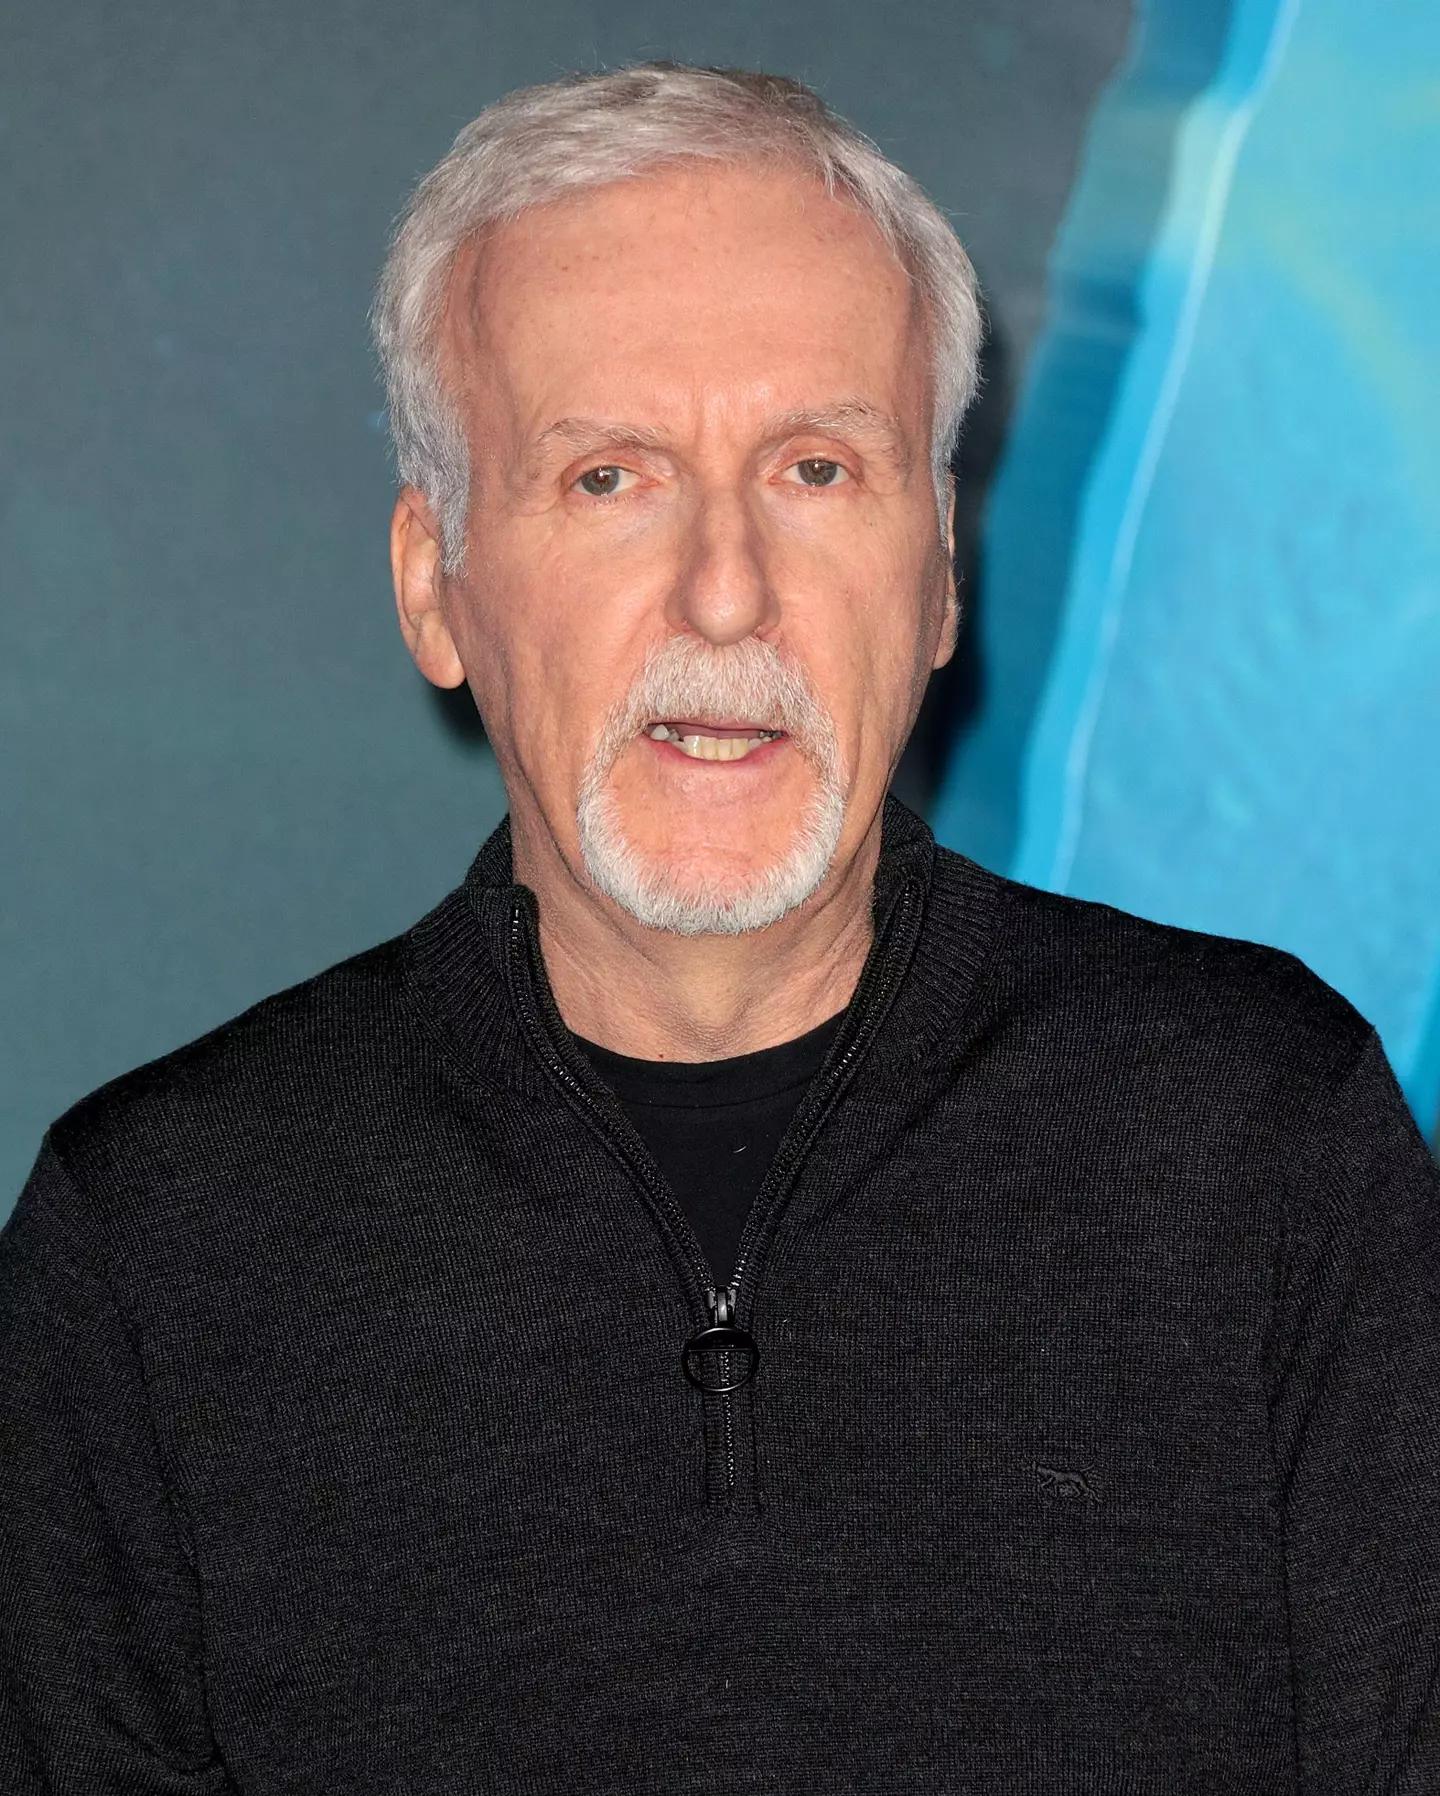 James Cameron worried about The Way of Water when the Covid-19 pandemic started.